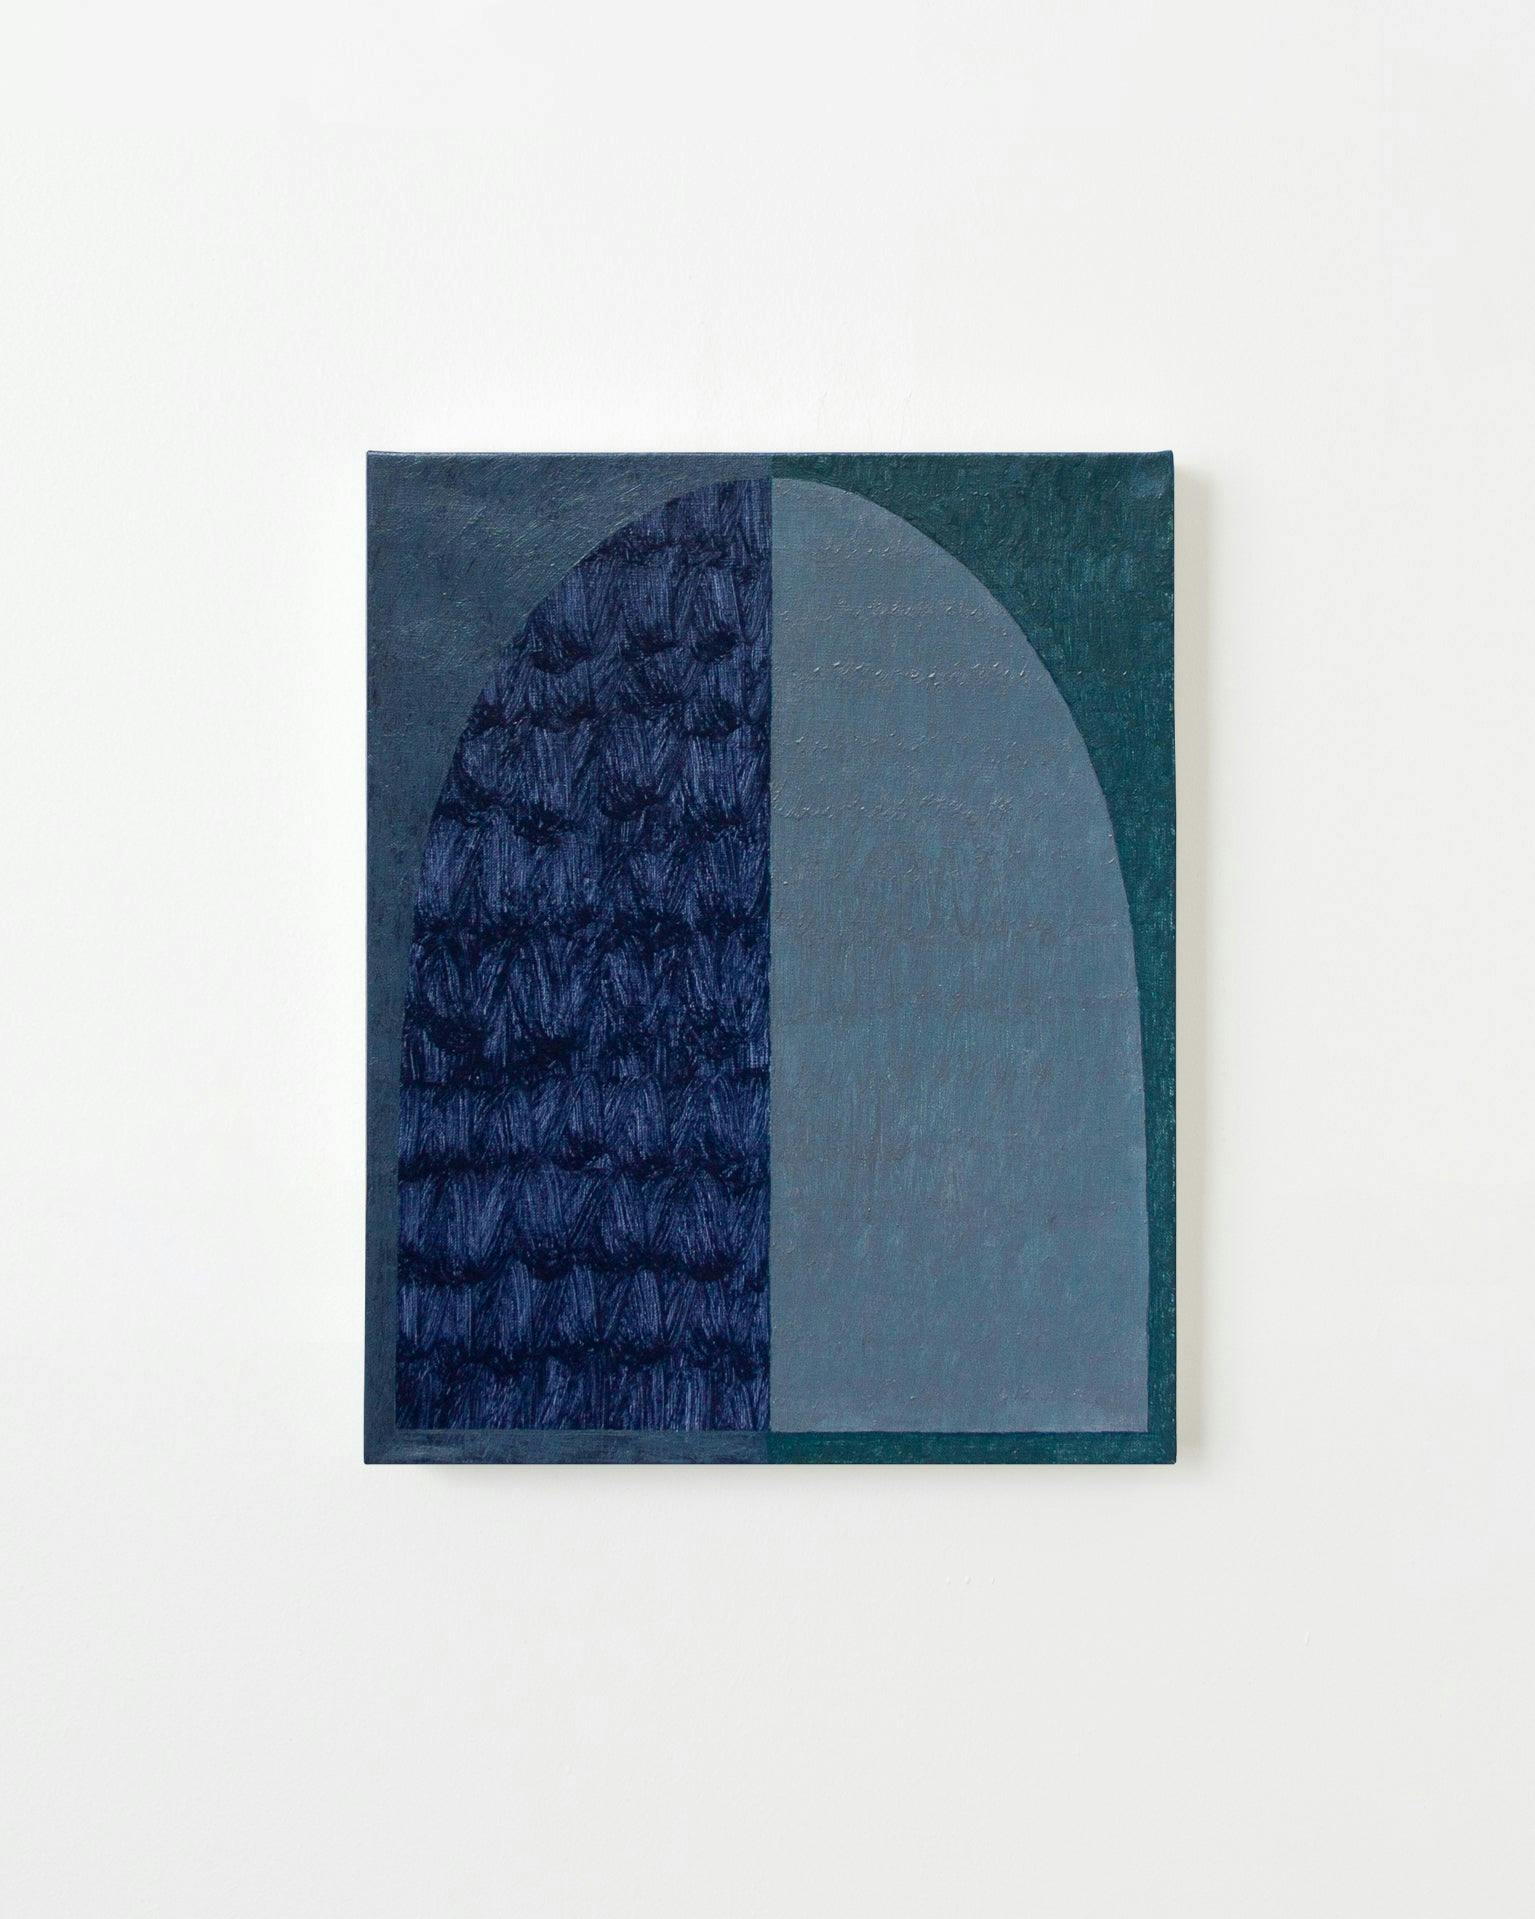 Painting by Aschely Vaughan Cone titled "Green Arch in Grey 208".